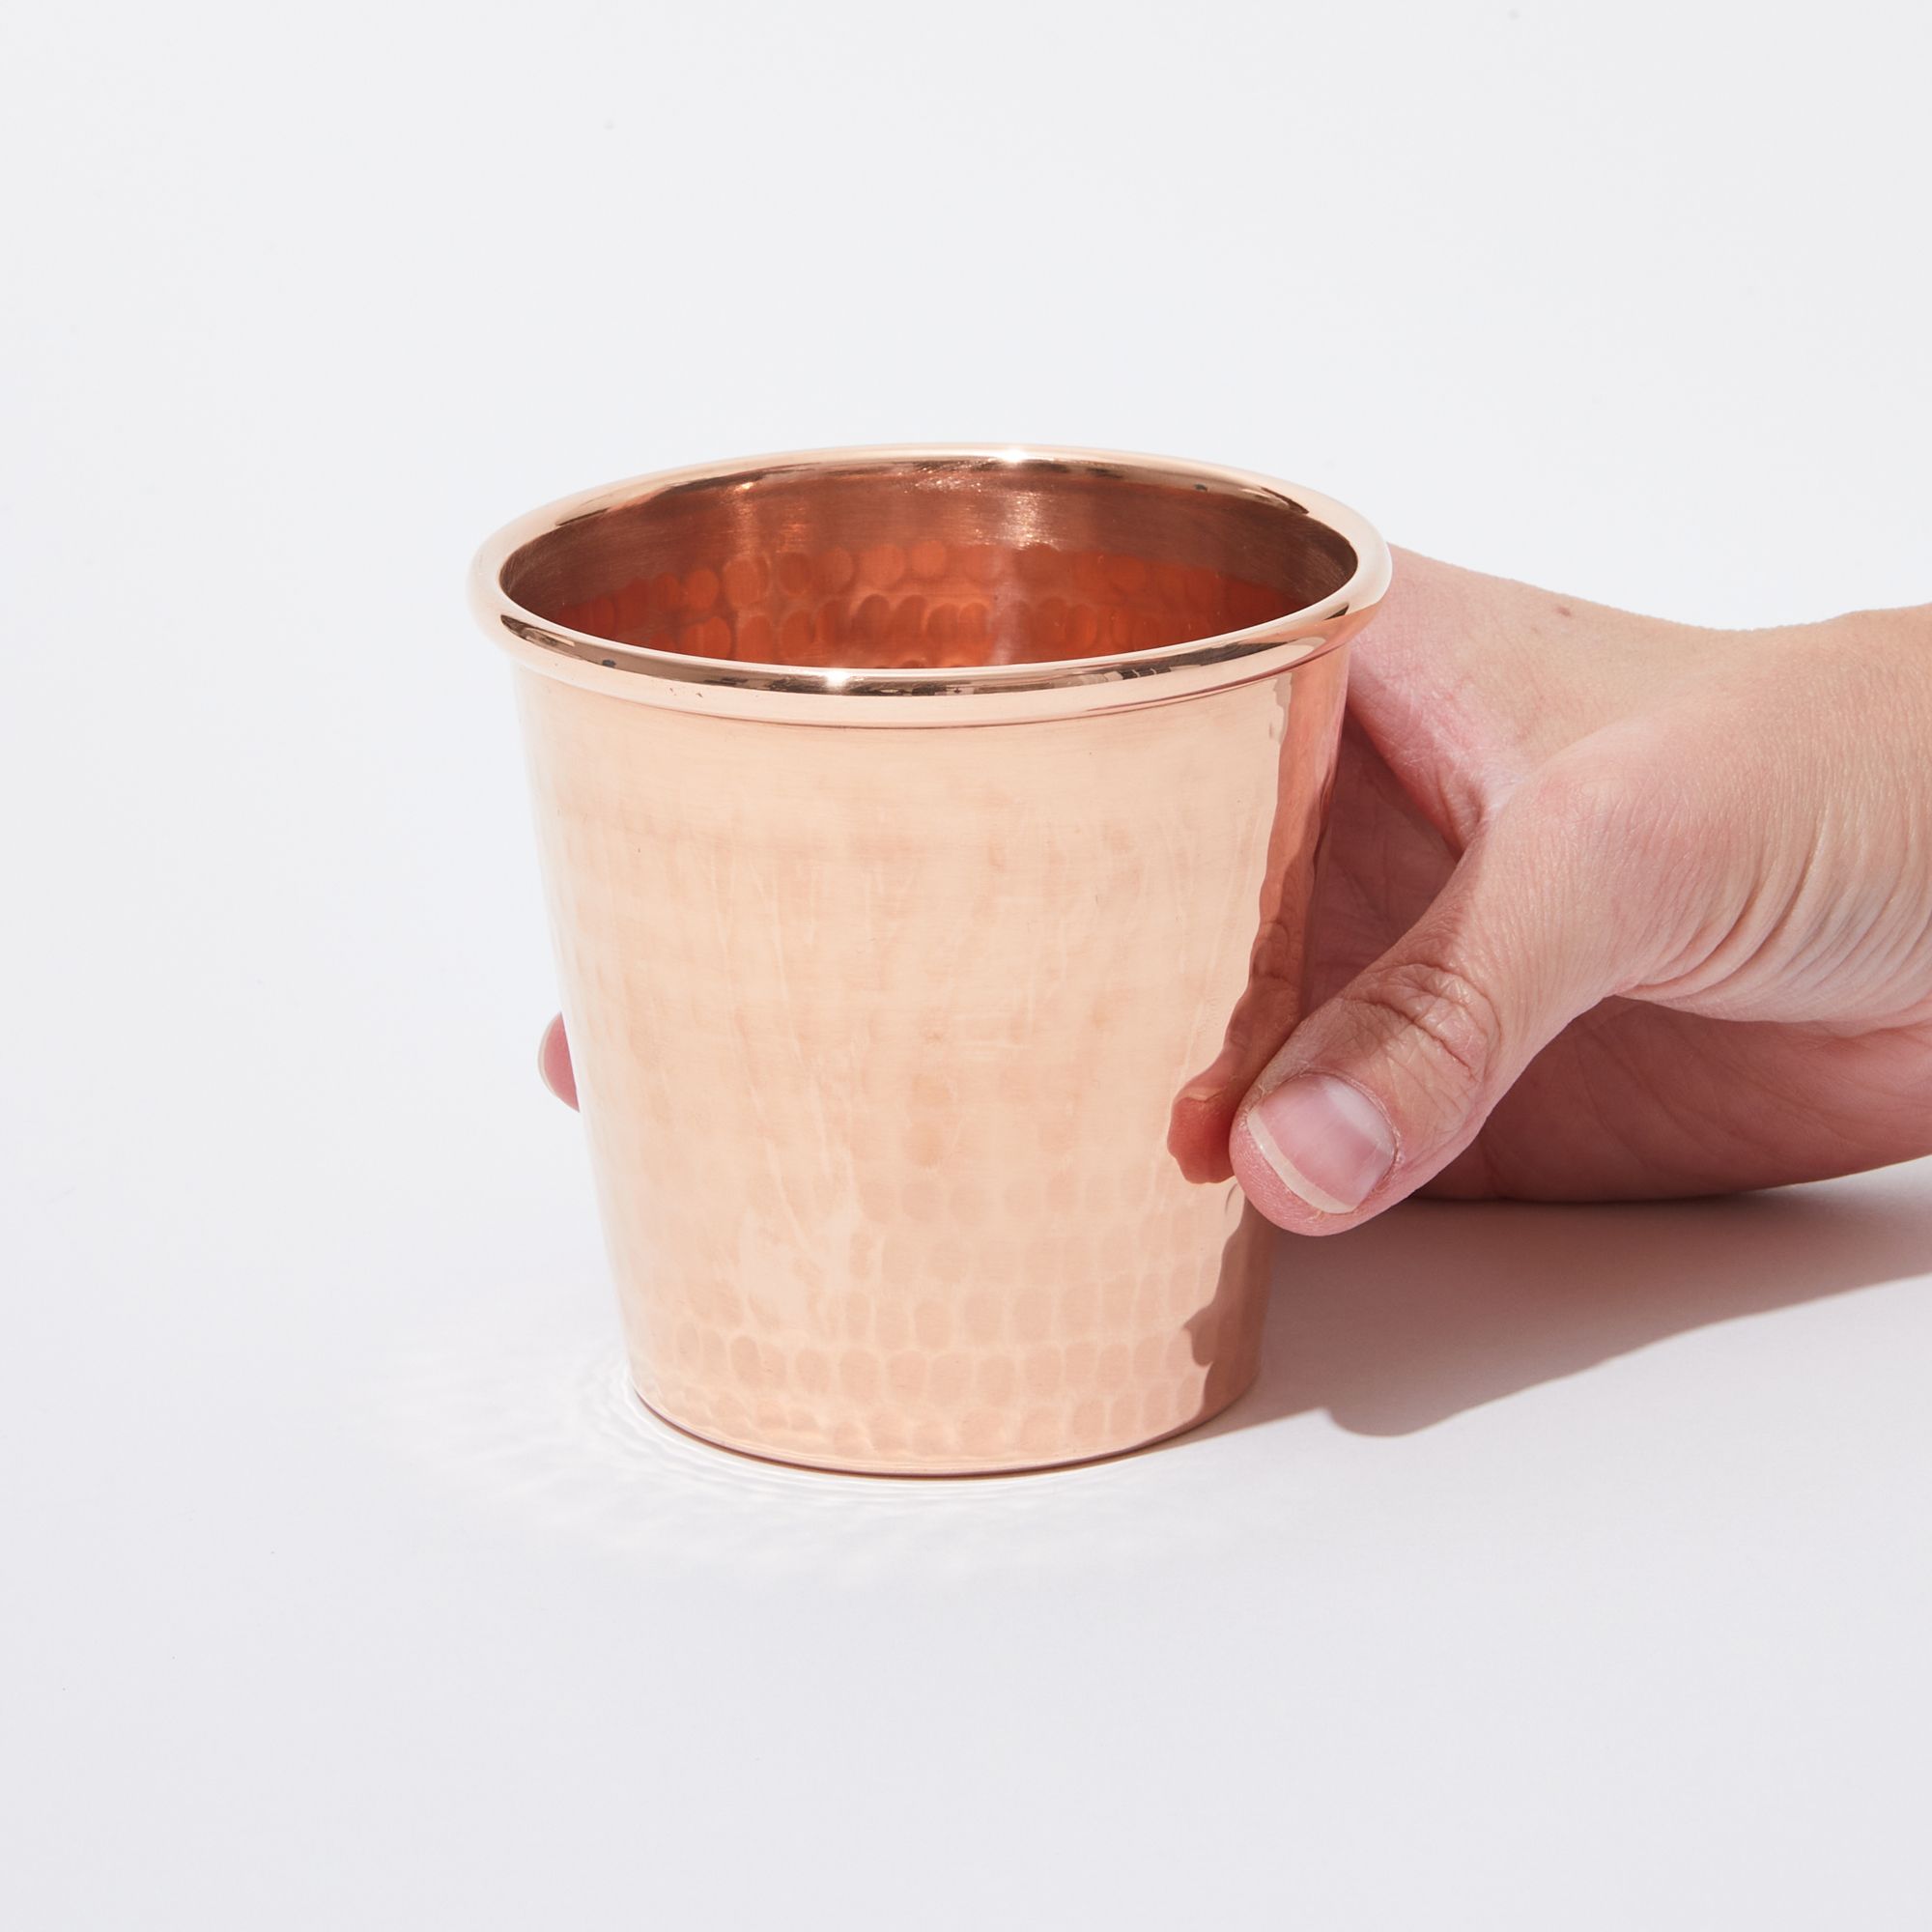 a hand holding a copper cup on the table